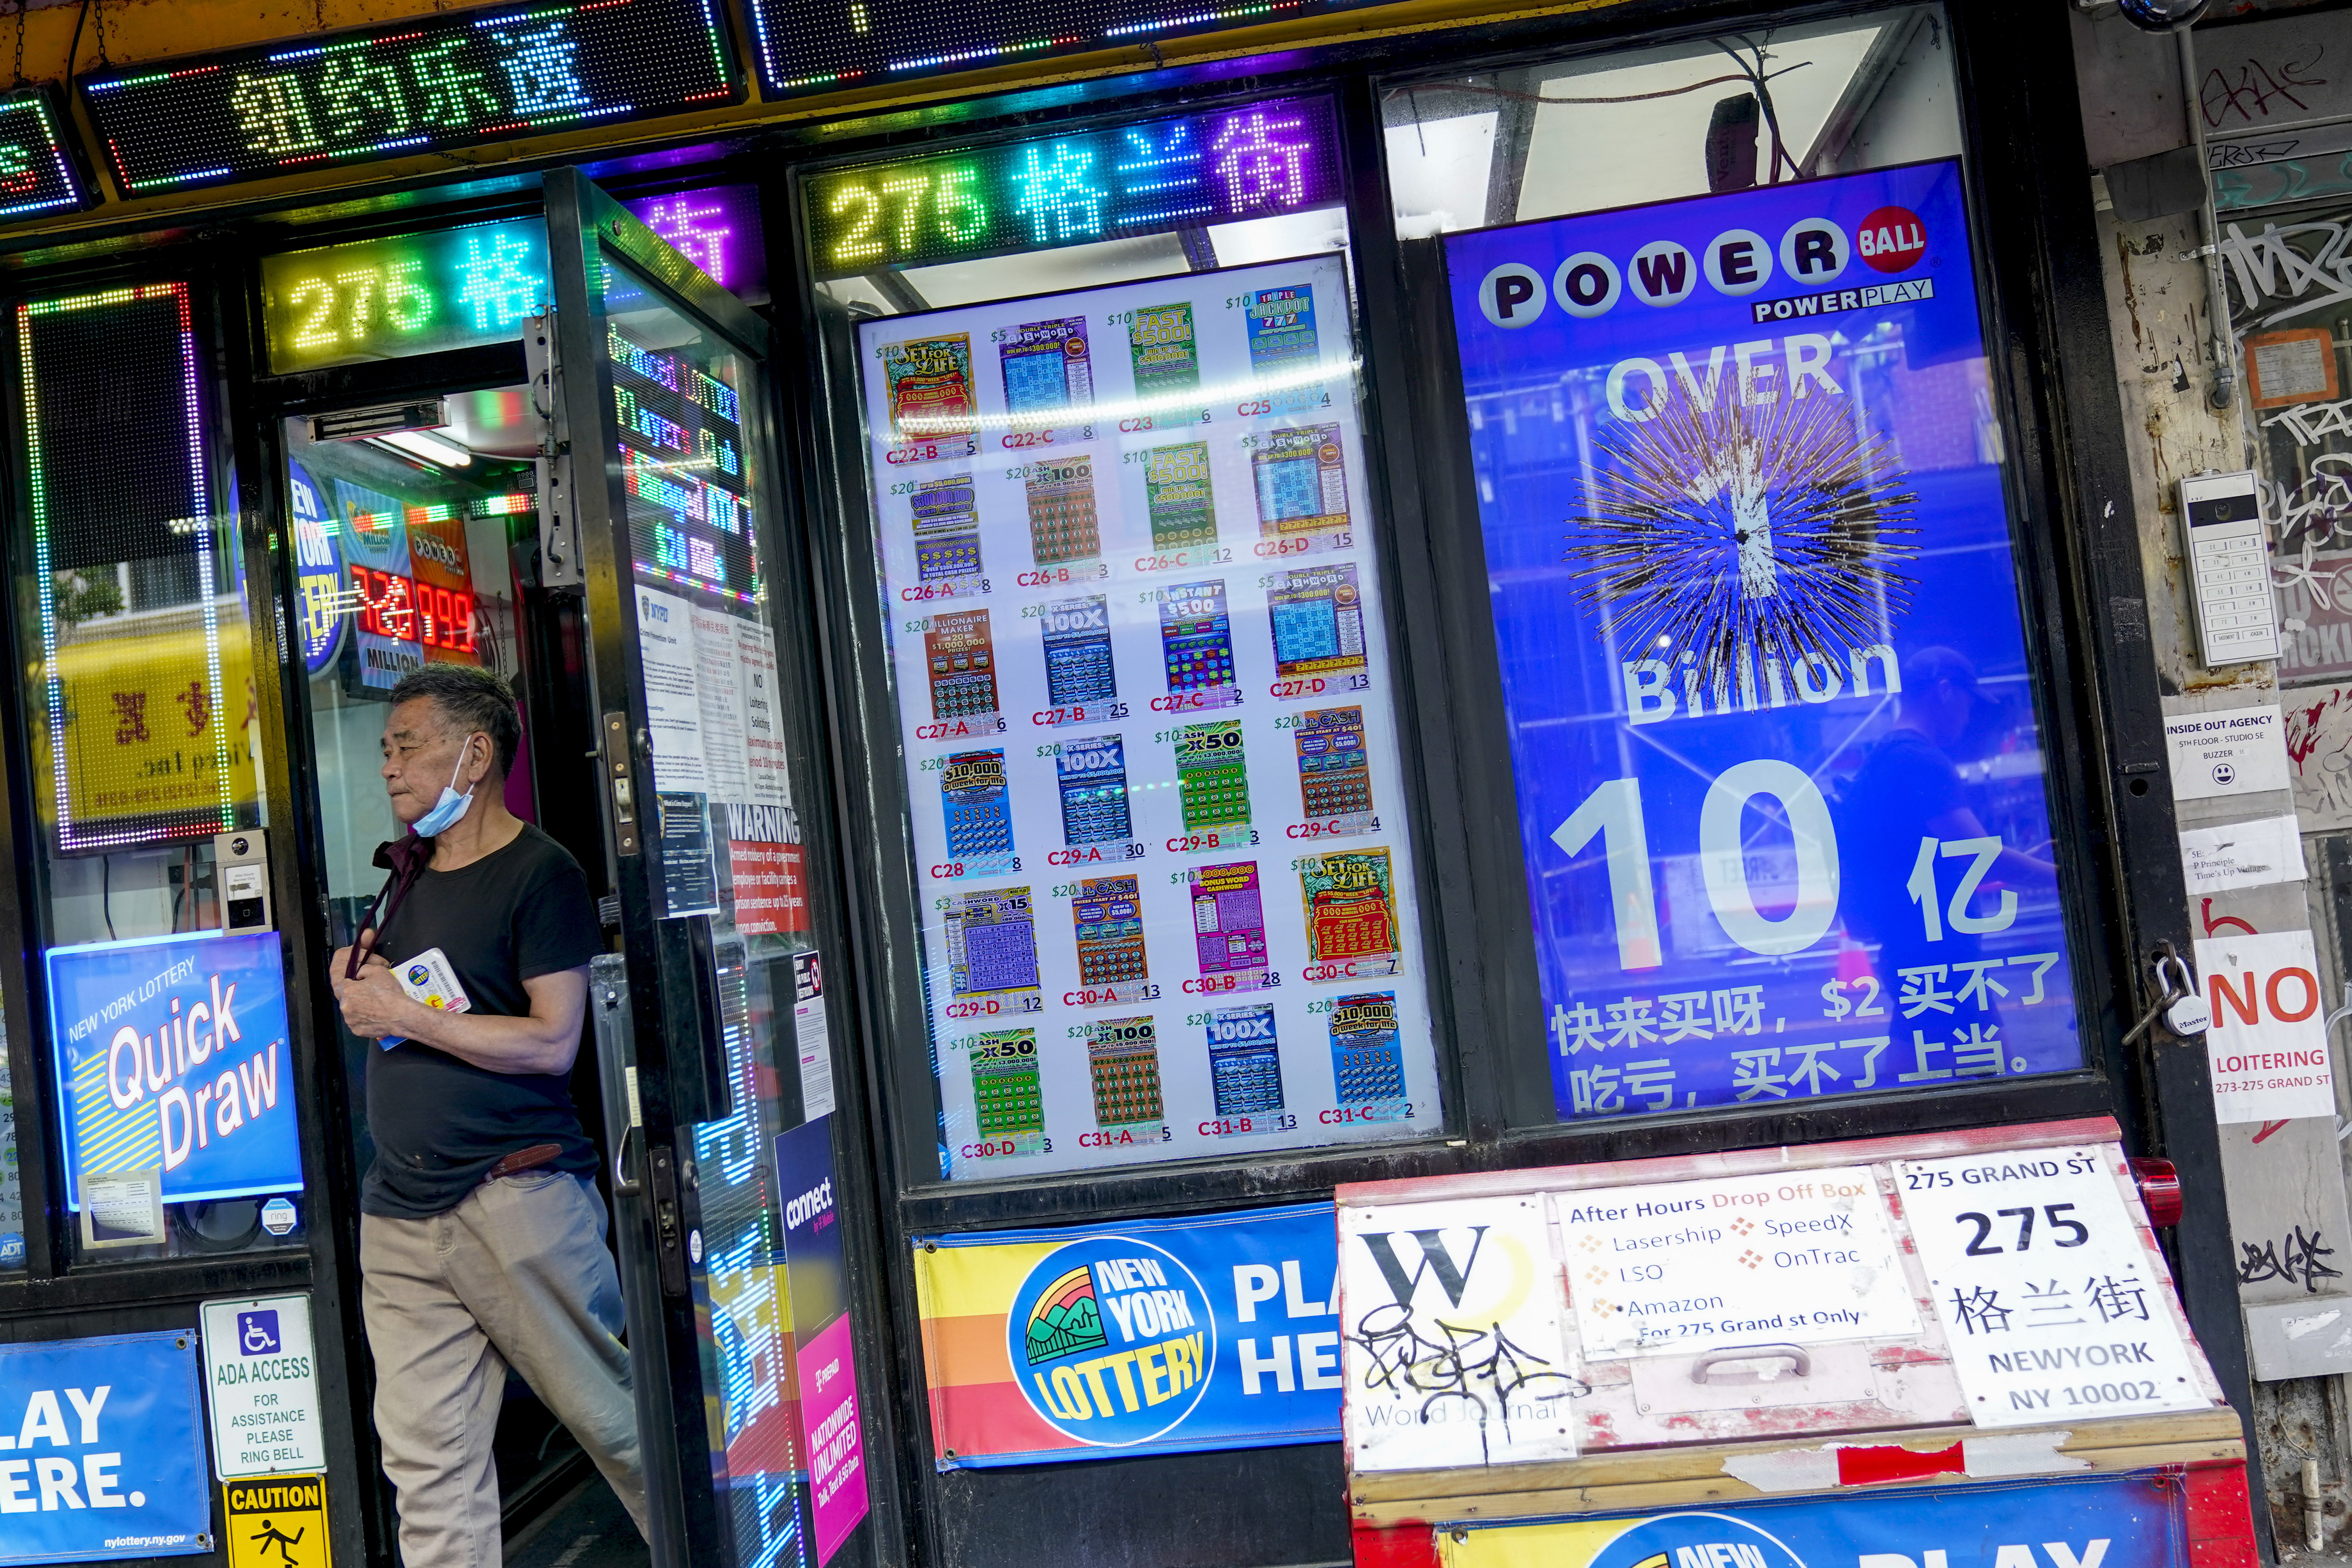 NY Lottery's new Quick Draw wager feature to launch Monday